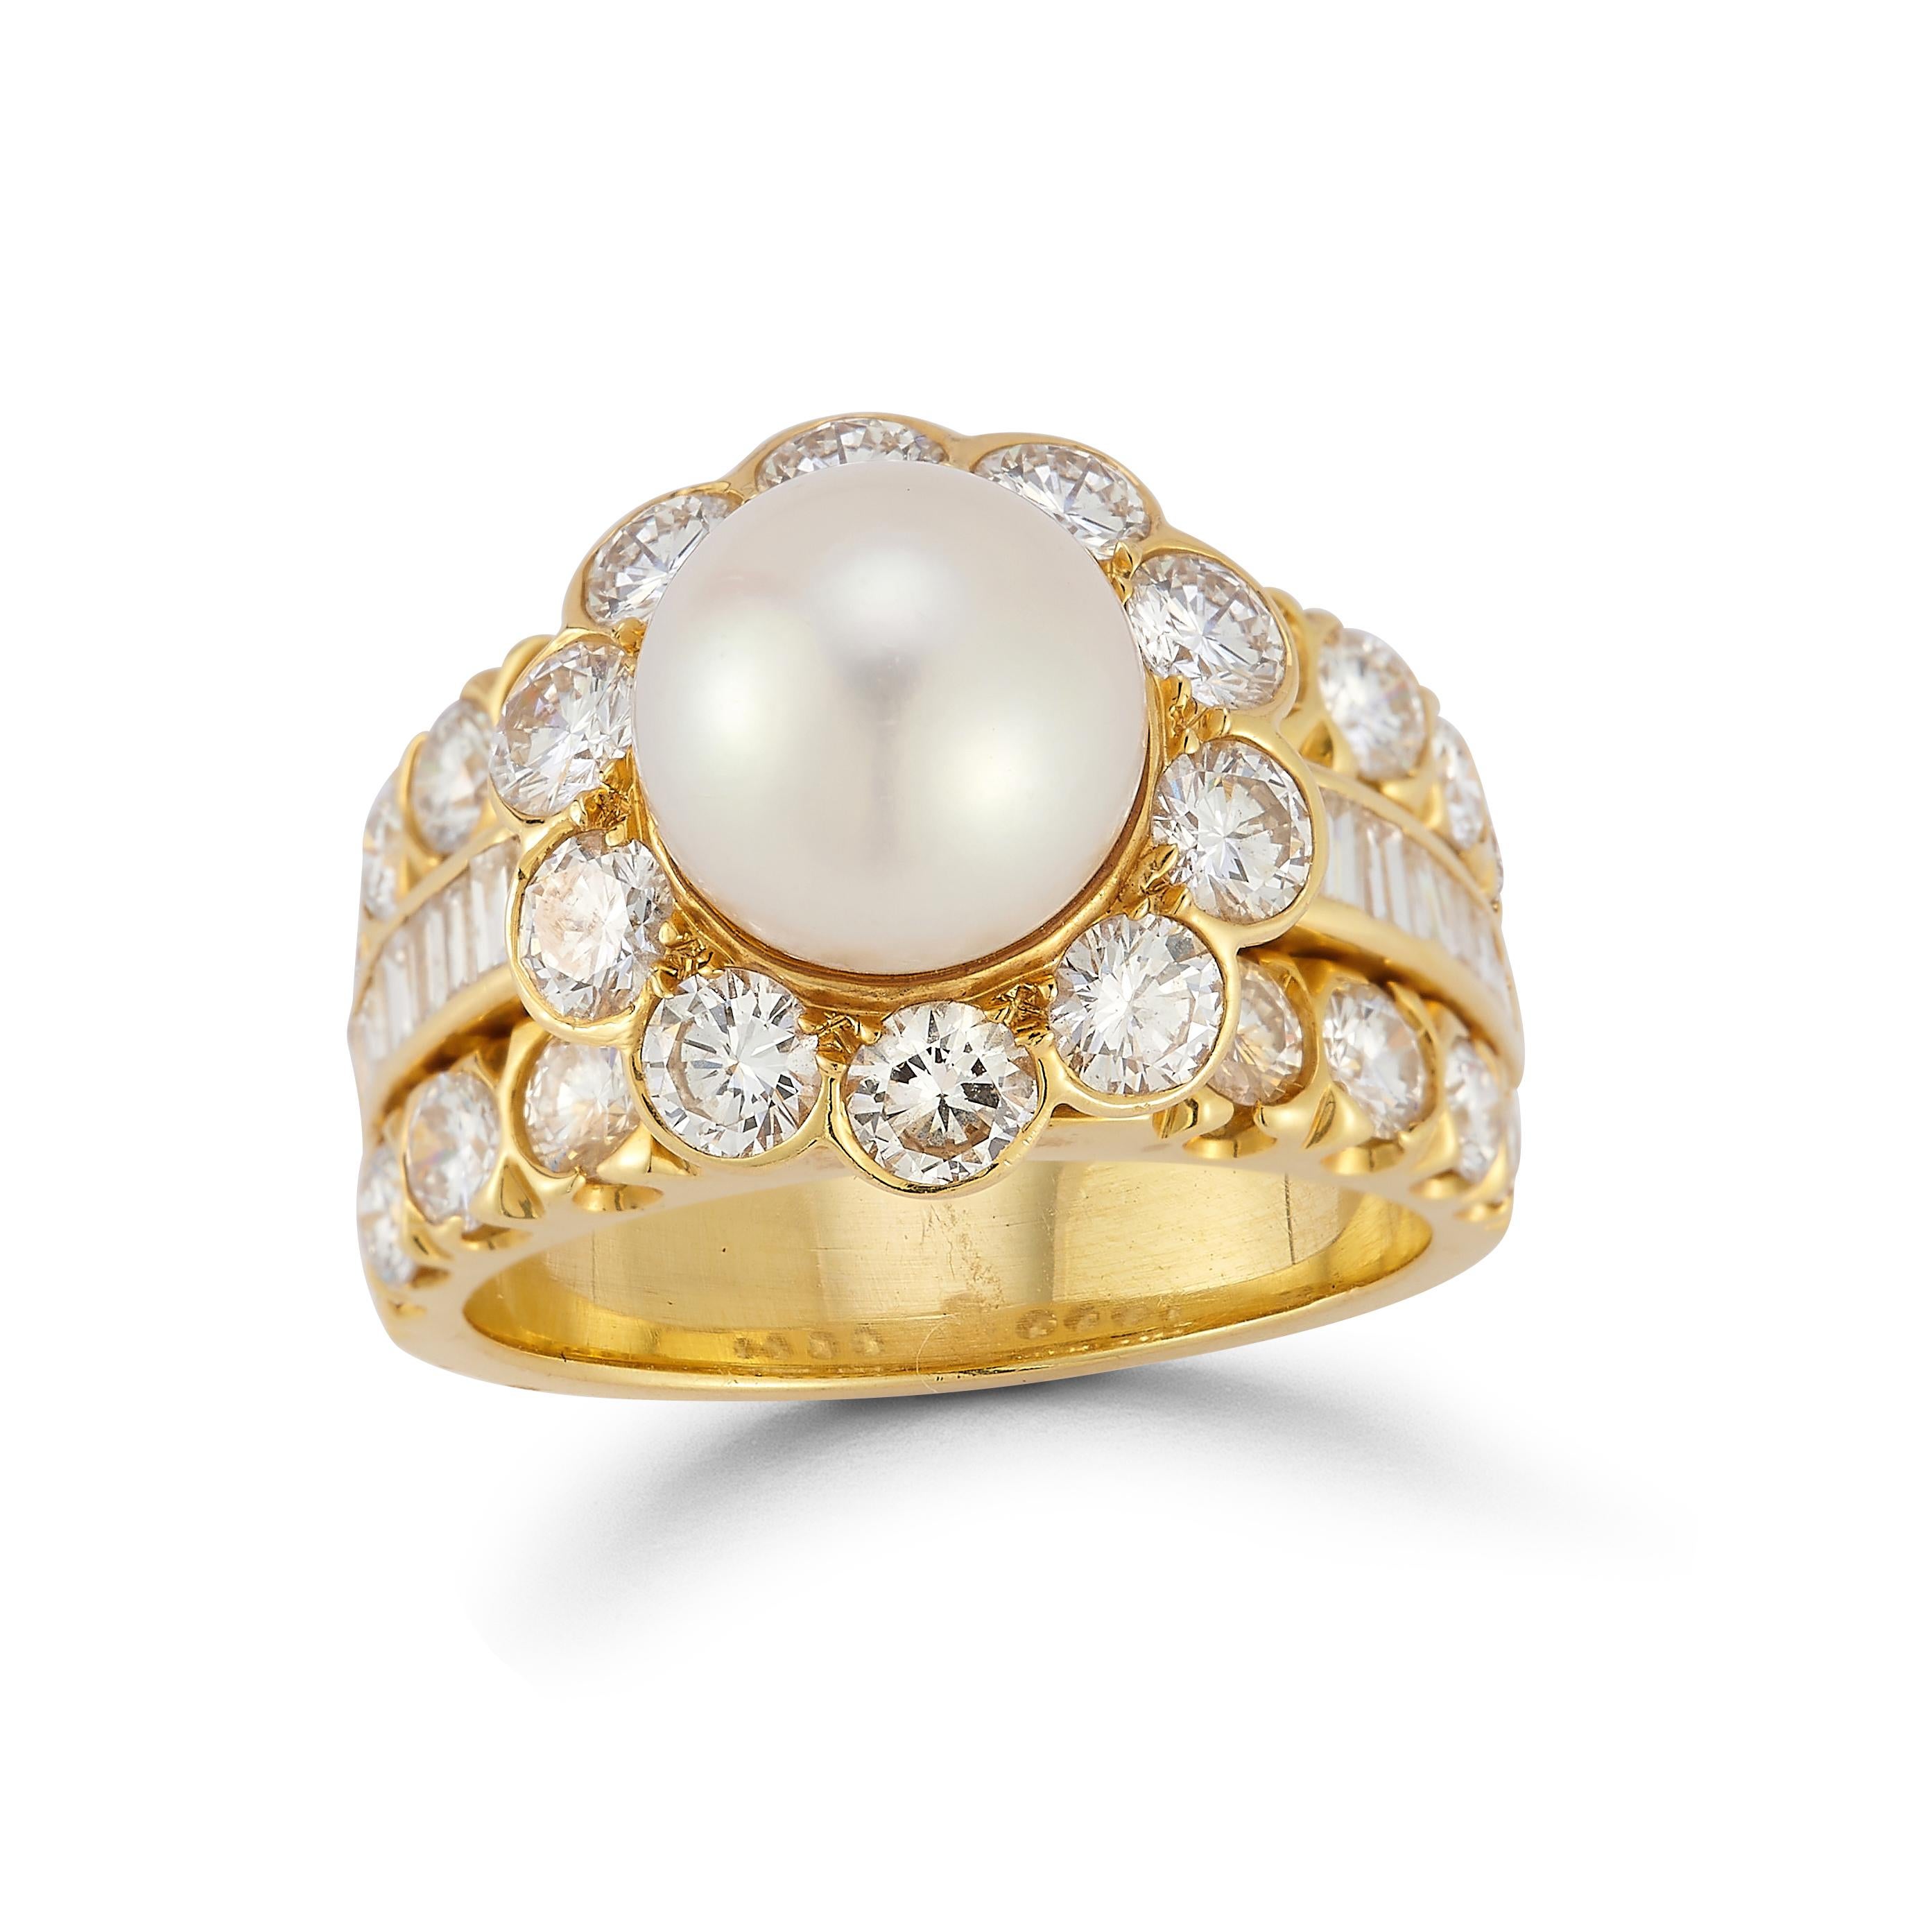 Van Cleef & Arpels Pearl & Diamond Ring. 

Featuring a center pearl encircled by round-cut diamonds set with a line of baguette-cut diamonds bordered by two rows of round-cut diamonds.

Ring Size: 6.25

Resizable free of charge 

Signed, VCA, 18k,